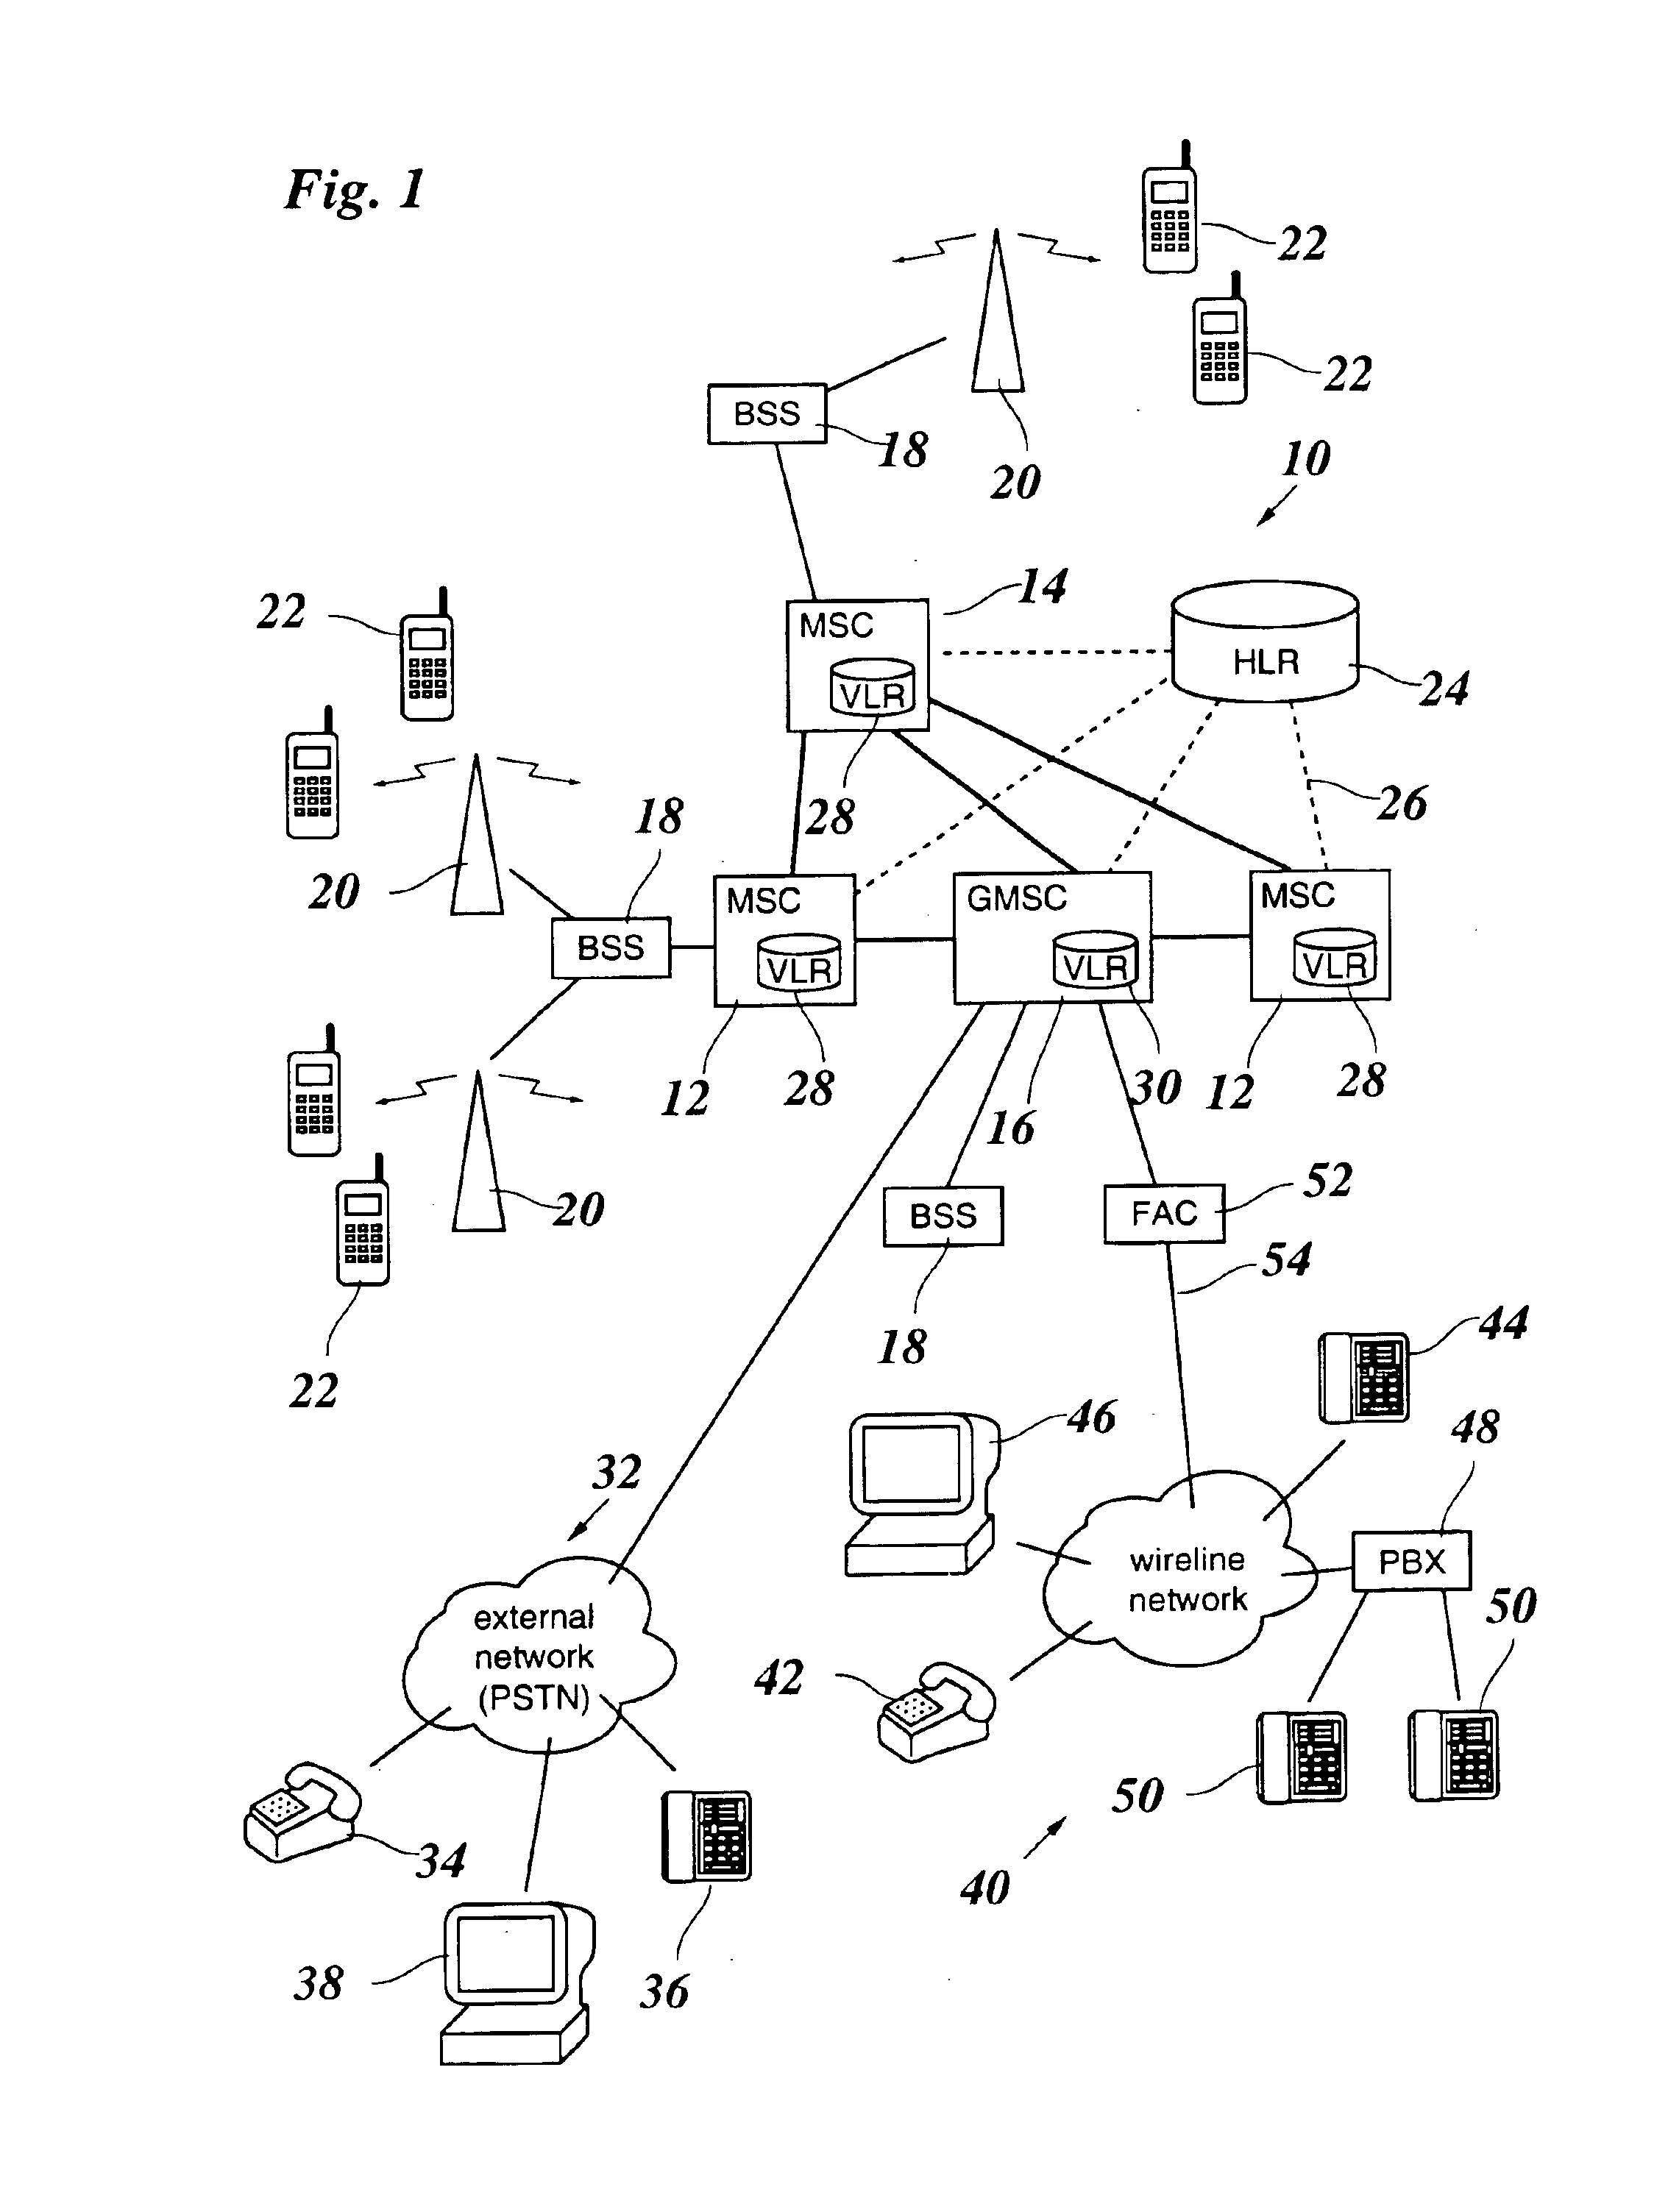 Method and system for integrating fixed terminals in a mobile telecommunication network